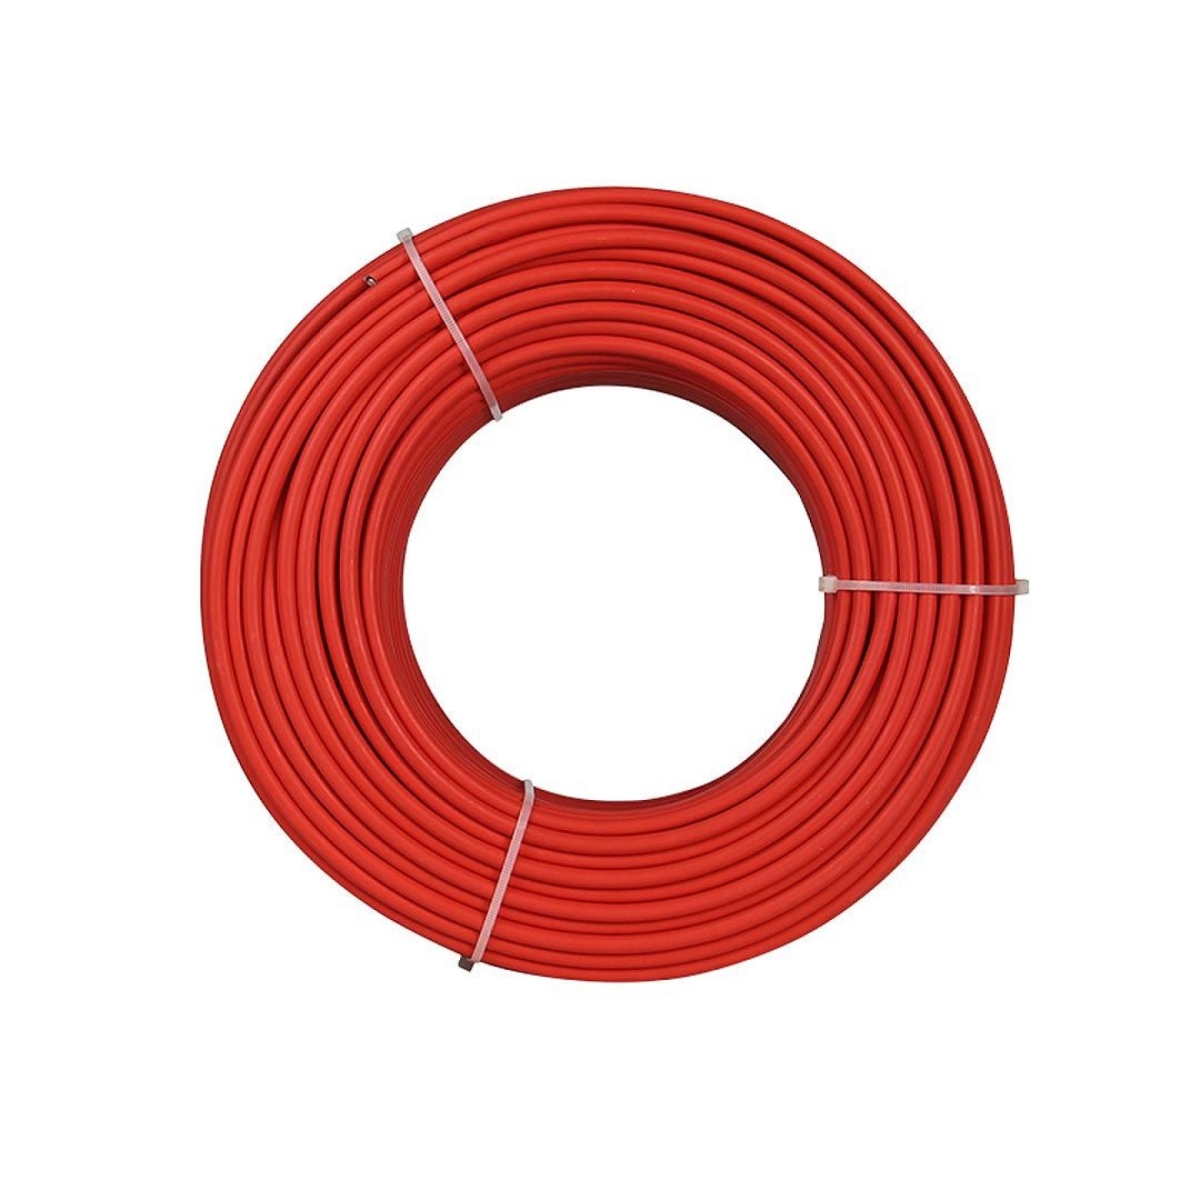 TommaTech 4.0 mm Solar Cable PVI1-F Red